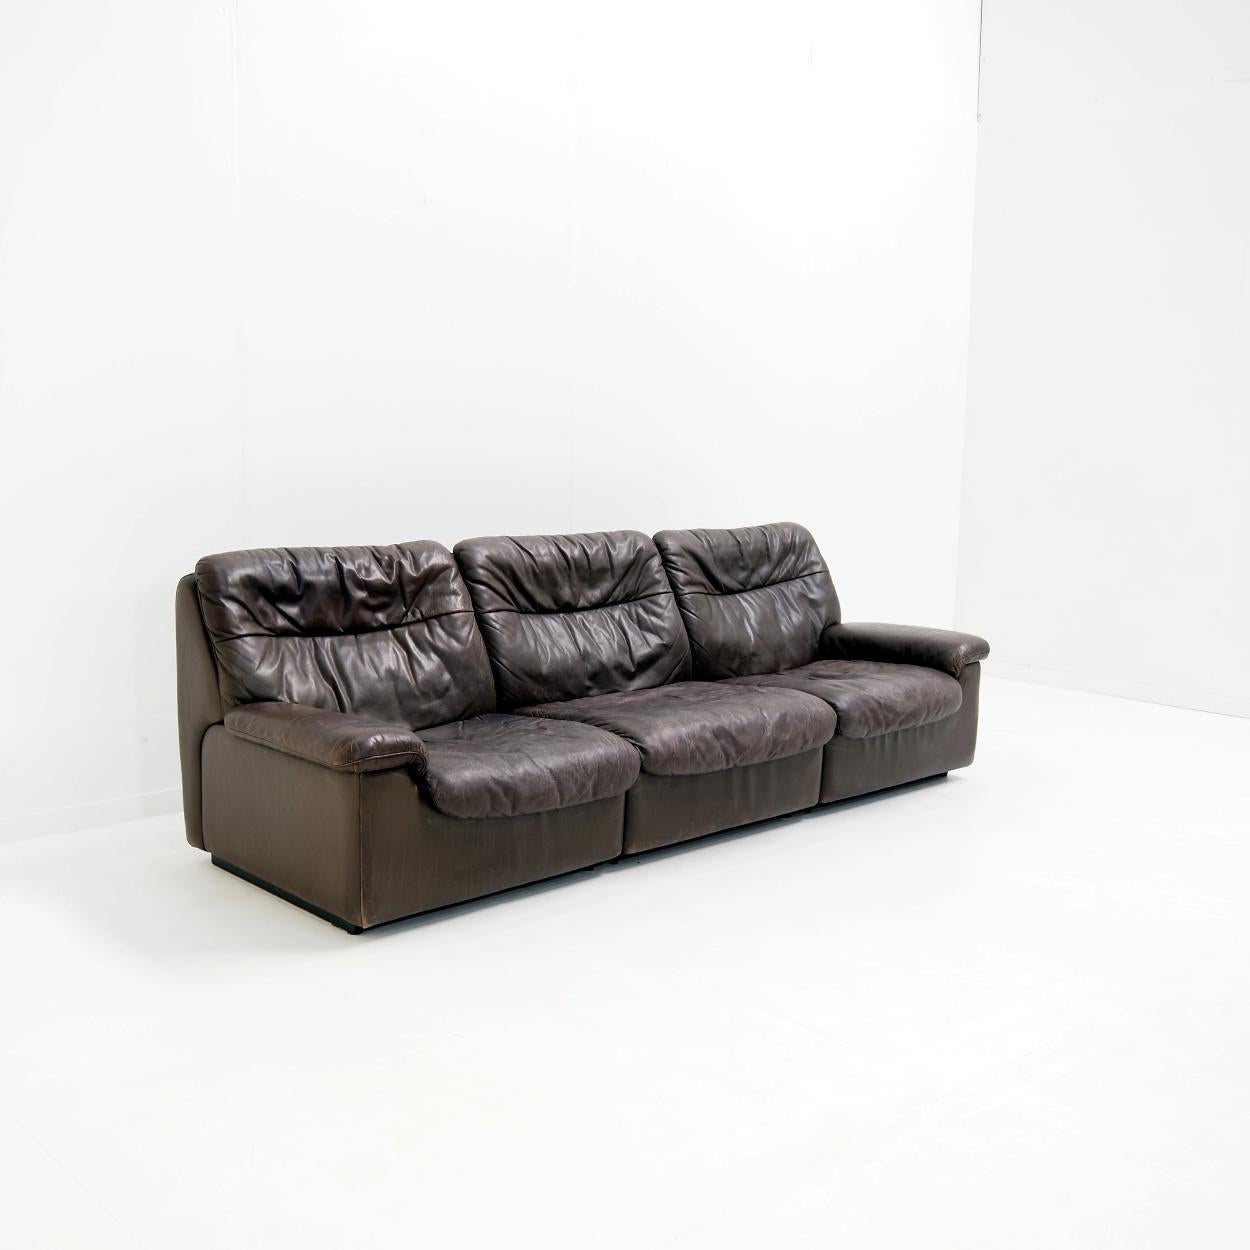 Designed in the 1970s by Carl Larsson, this funky De Sede DS-66 sofa with nice wear and tear is a real pleasure to sit in. It’s soft leather and soft cushions provide a very relaxed sitting experience, where you really can regain your strength. Even